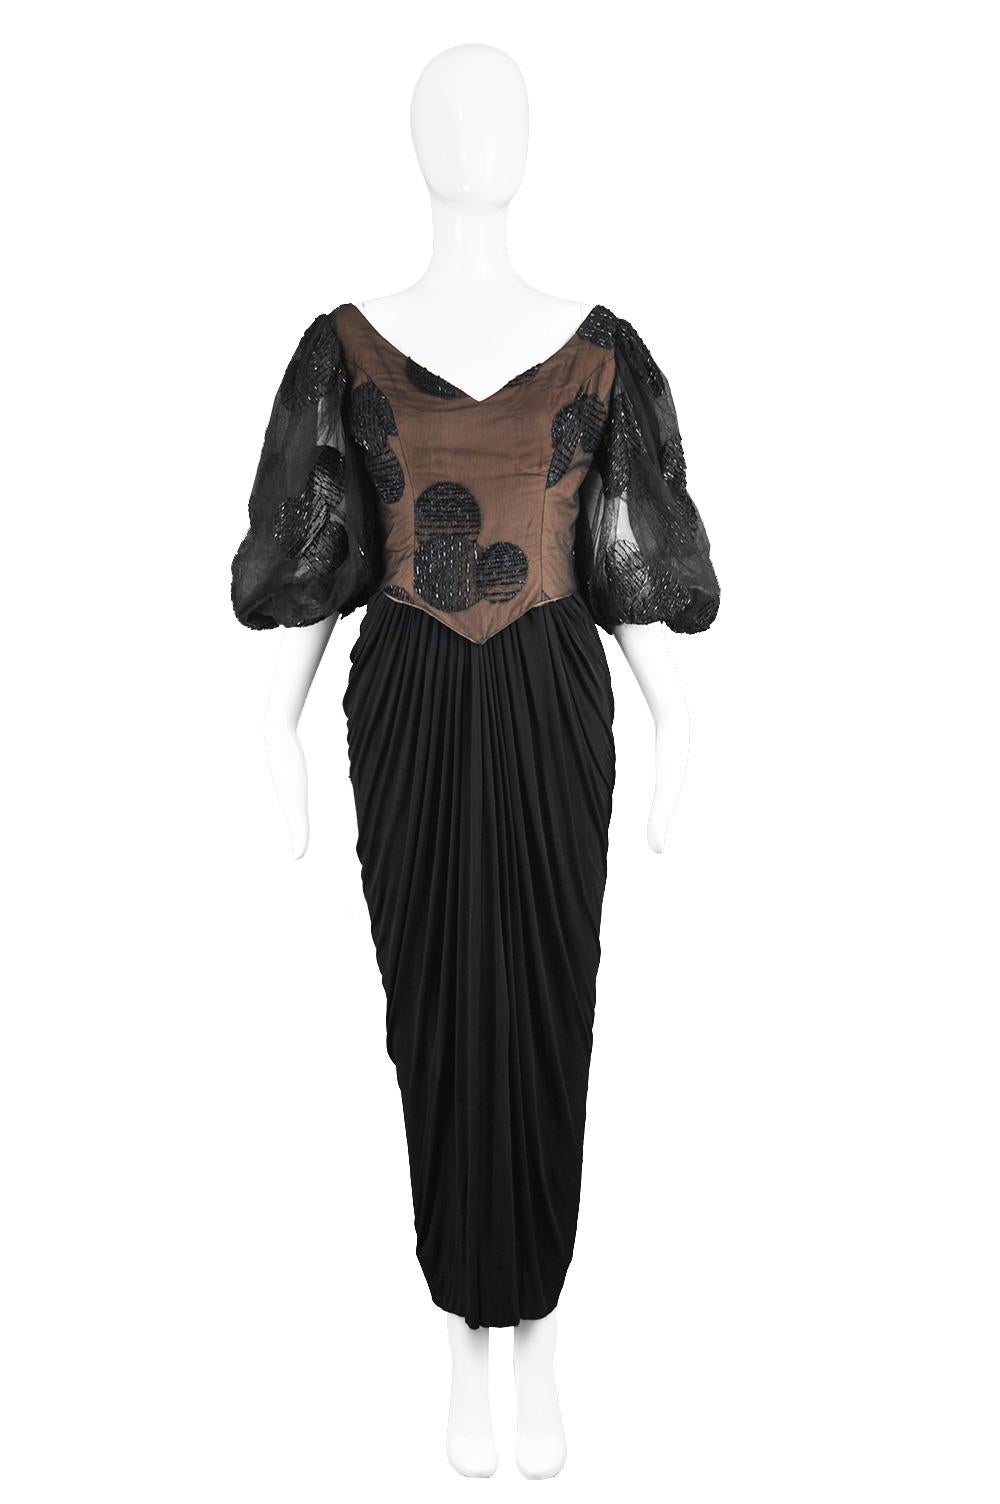 Estimated Size: UK 10-12/ US 6-8/ EU 38-40. Please check measurements. 
Bust - 35” / 89cm
Waist - 30” / 76cm
Hips - 36” / 91cm 
Length (Shoulder to Hem) - 53” / 140cm

An incredibly glamorous vintage evening dress from the 80s by Manila born,